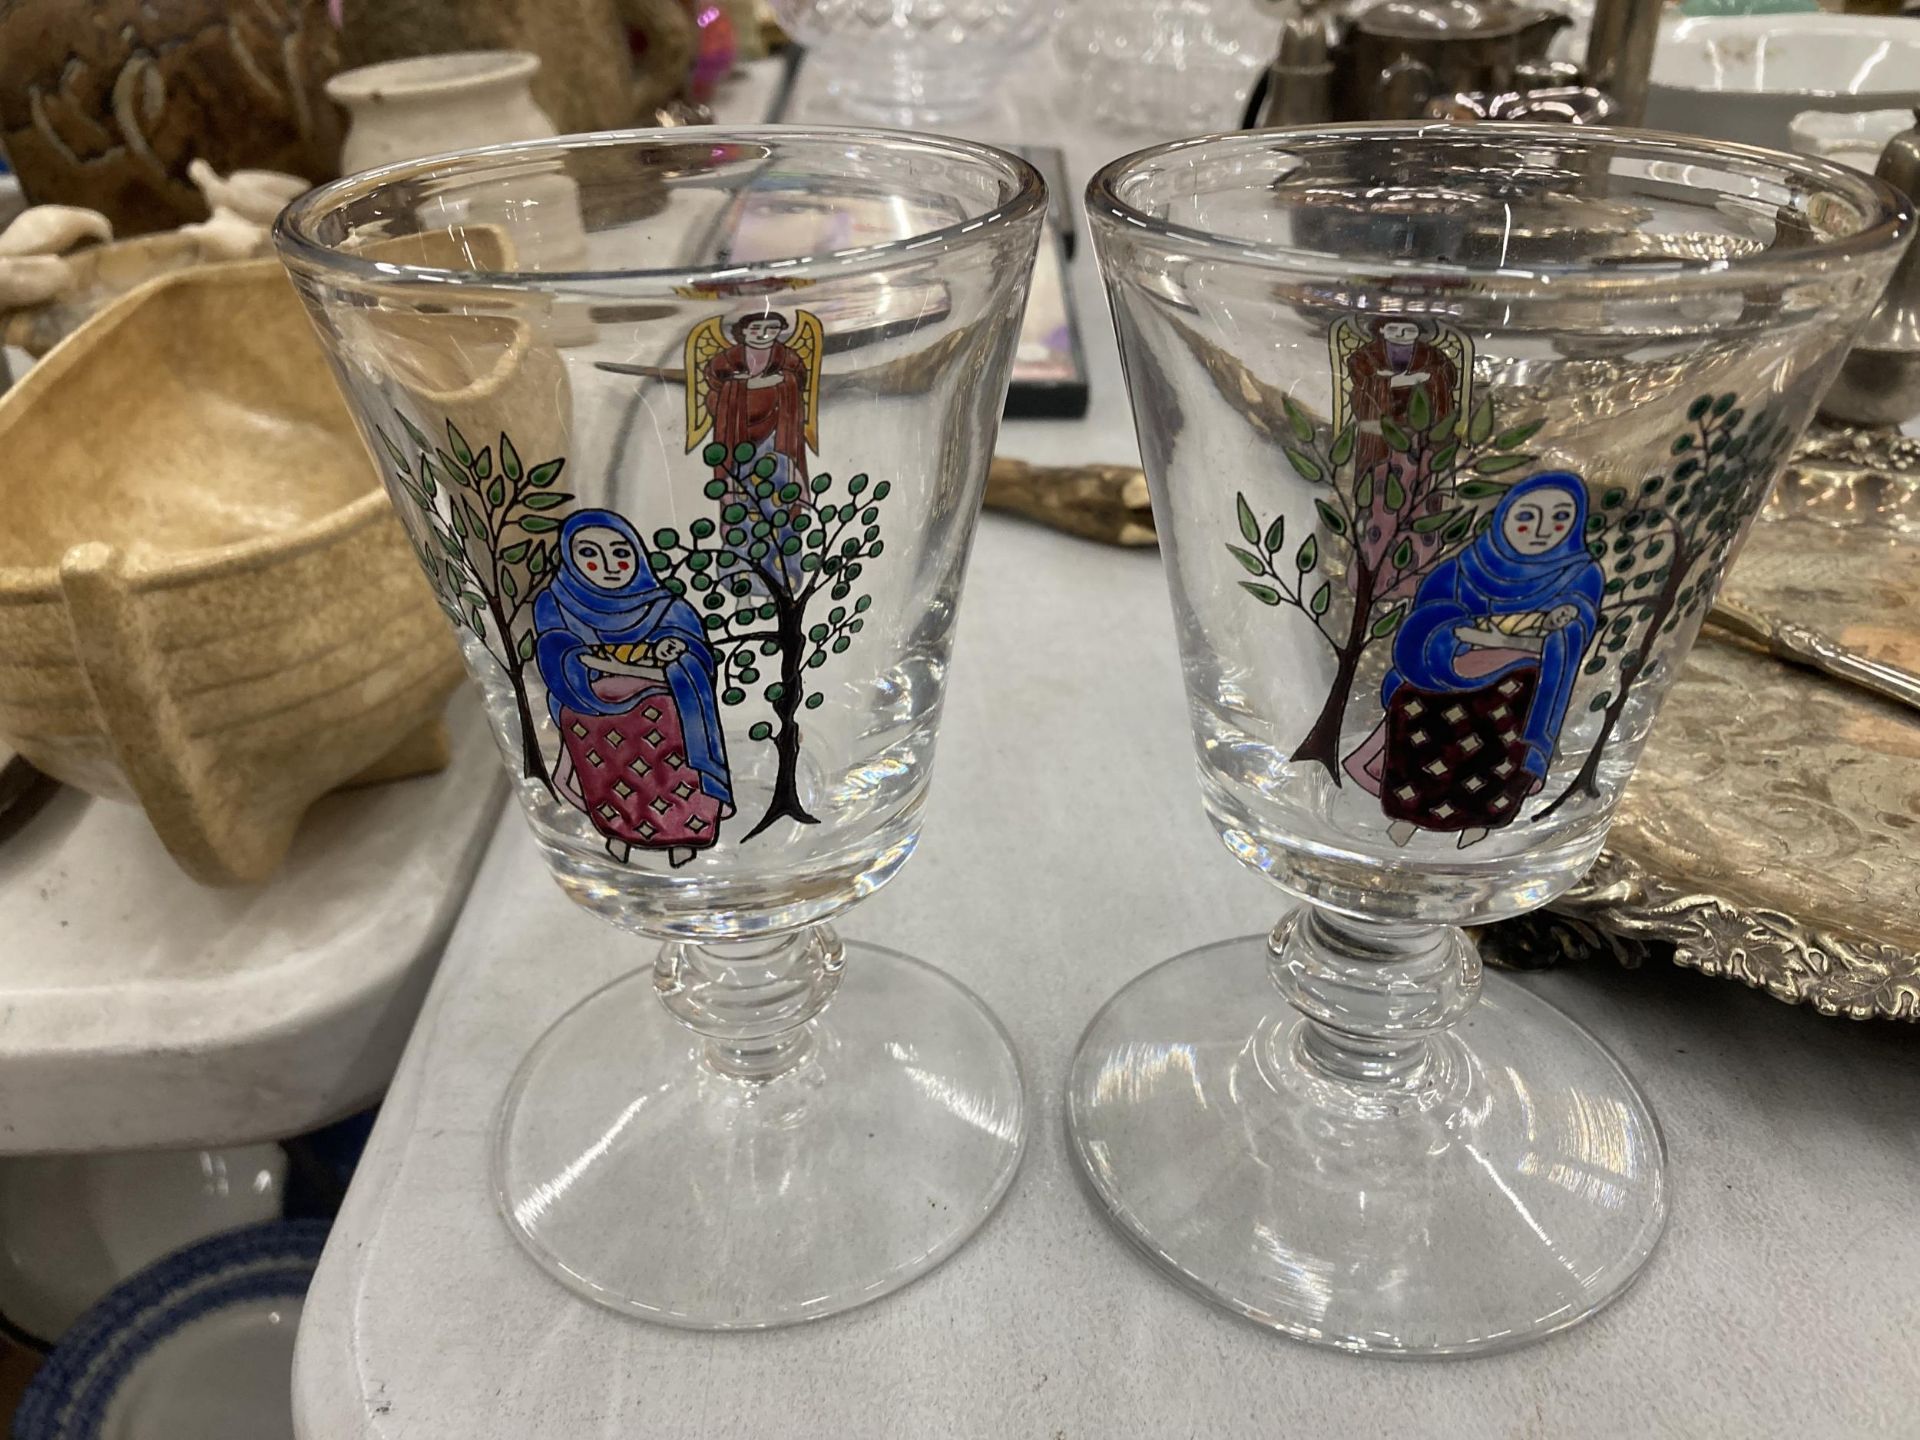 TWO LARGE HEAVY VINTAGE HAND BLOWN GLASSES WITH ANGEL AND MOTHER AND CHILD HAND PAINTED DESIGN